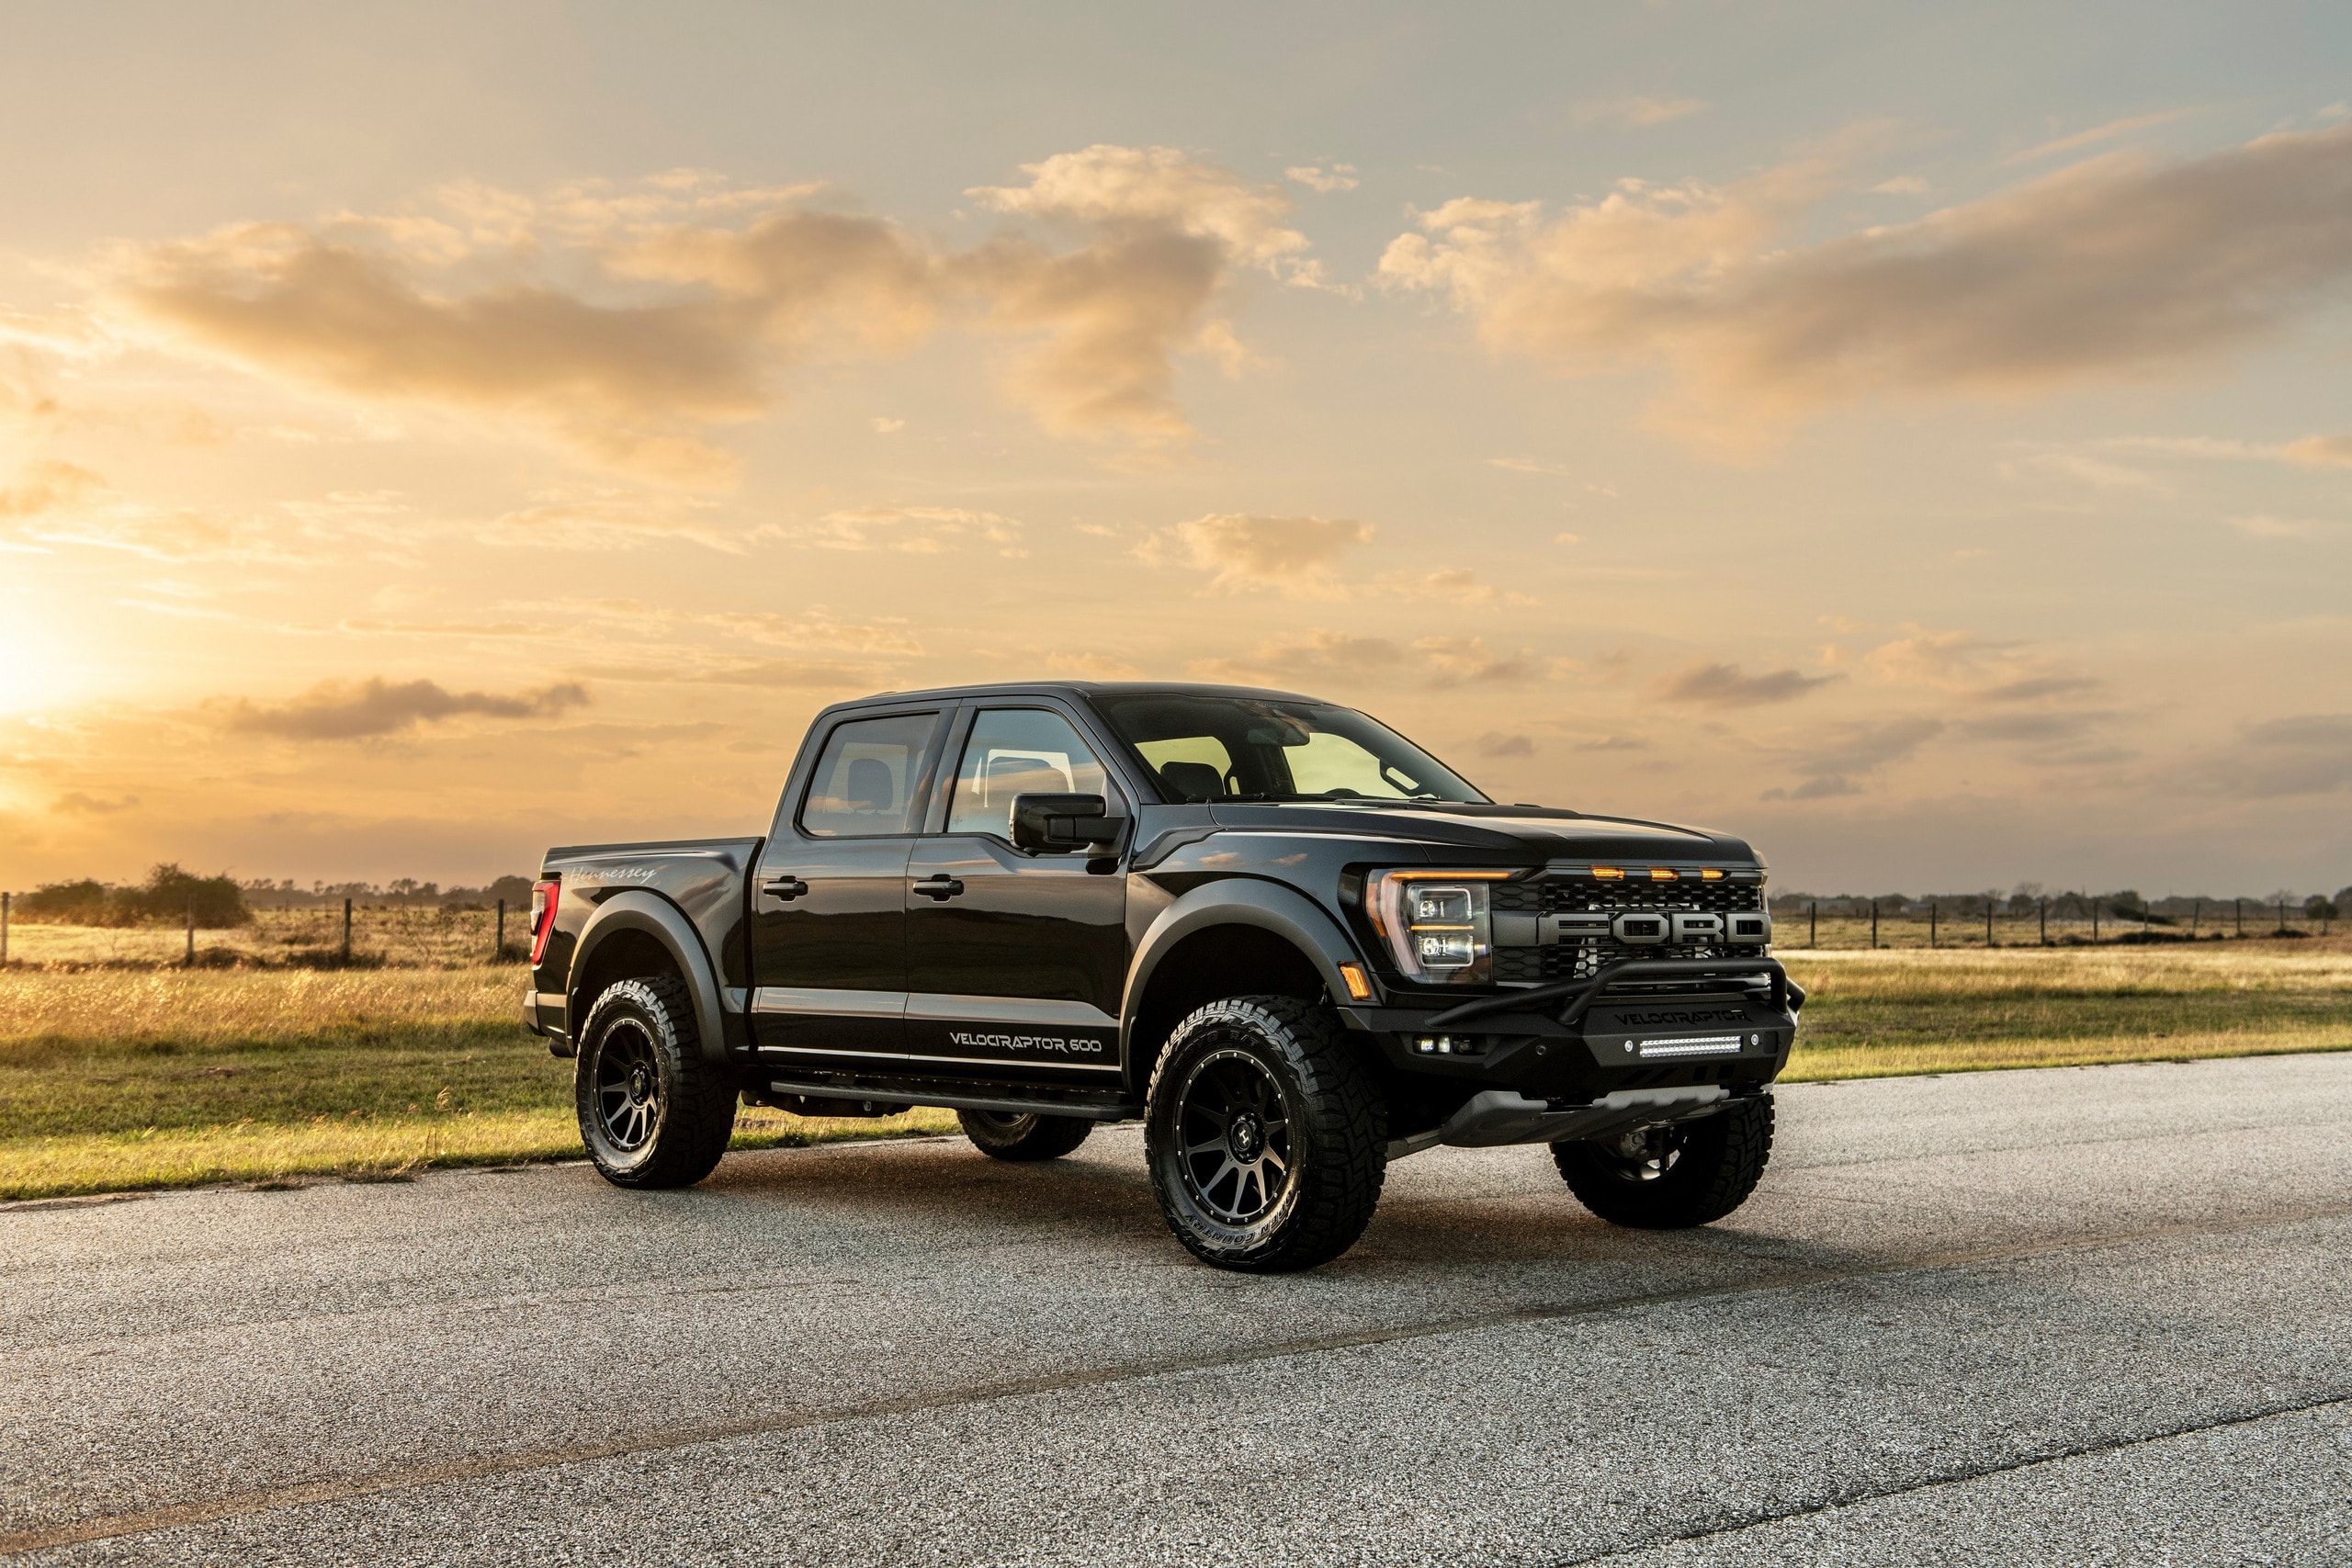 2022 Hennessey VelociRaptor 600 Enters Production, Here's How Much